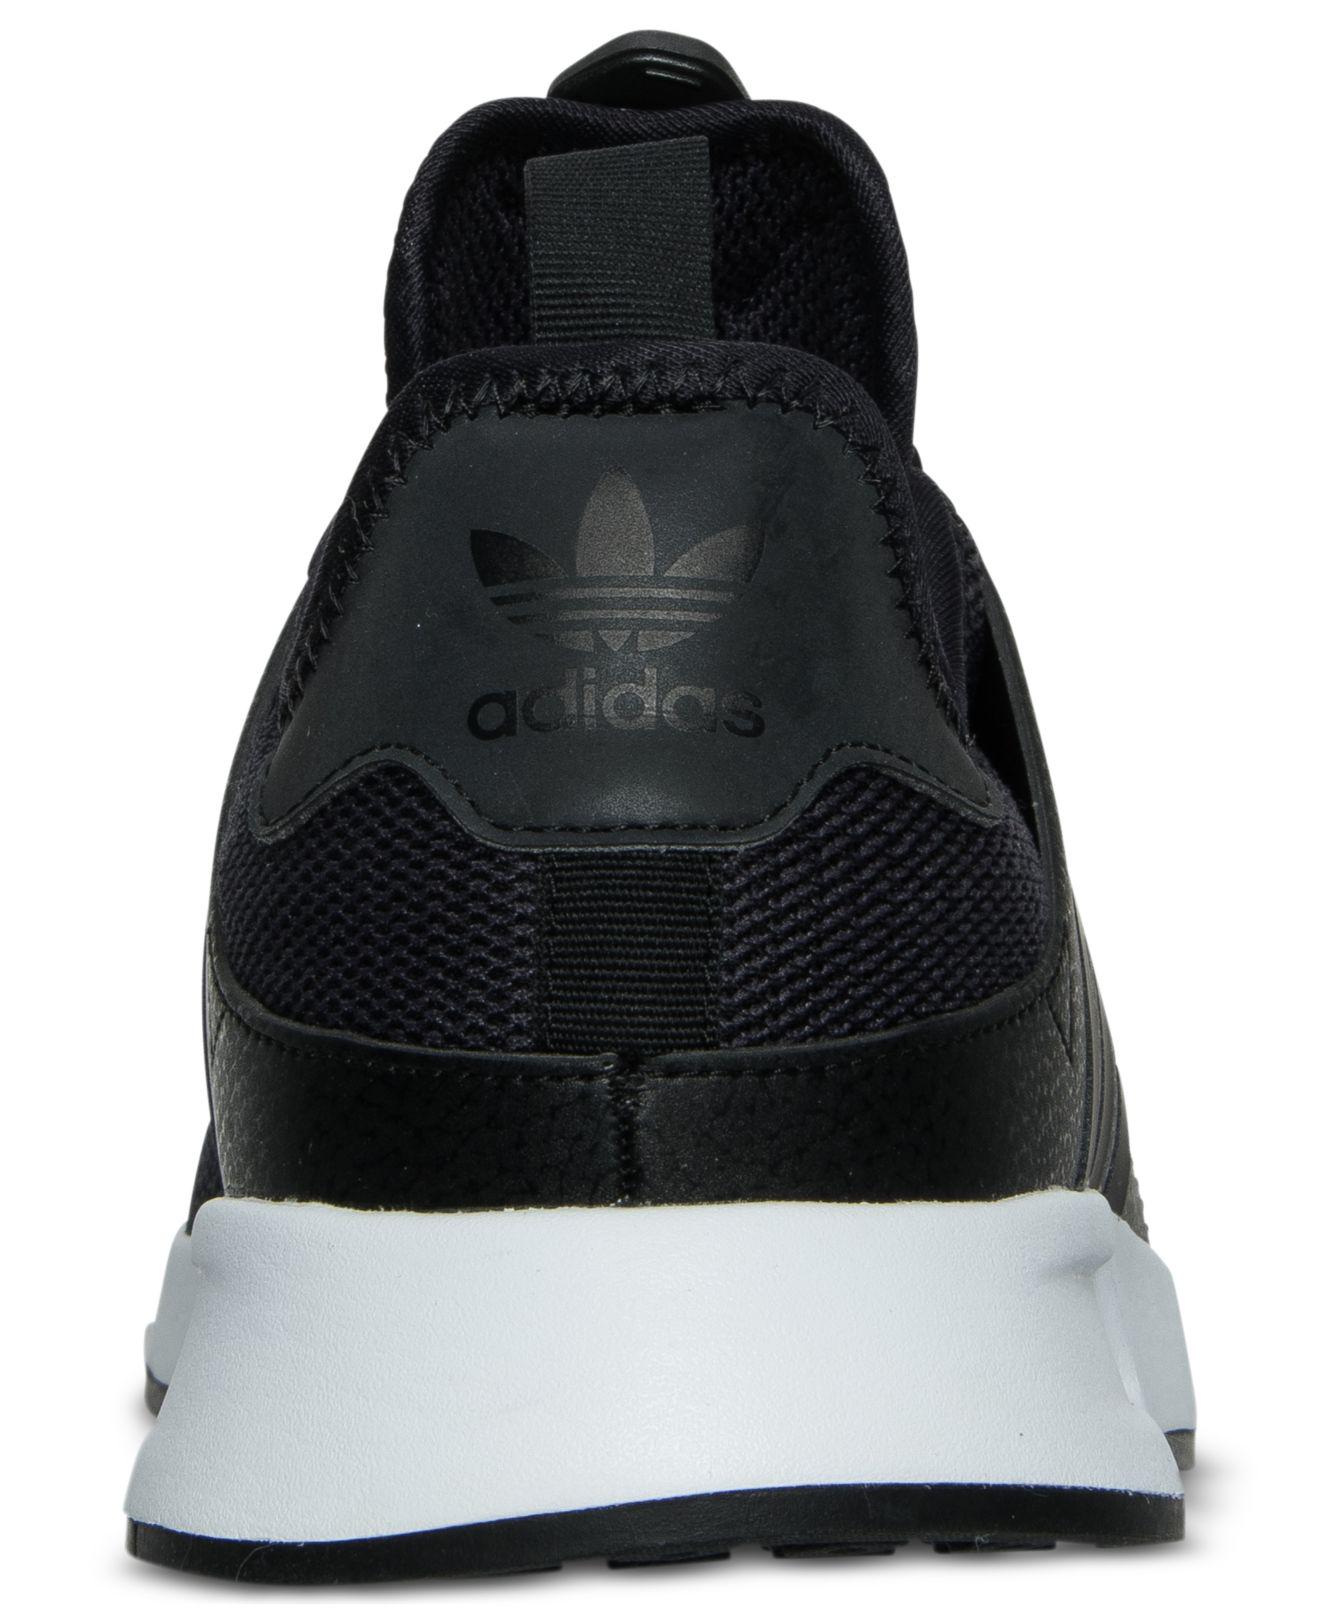 adidas men's xplorer casual sneakers from finish line